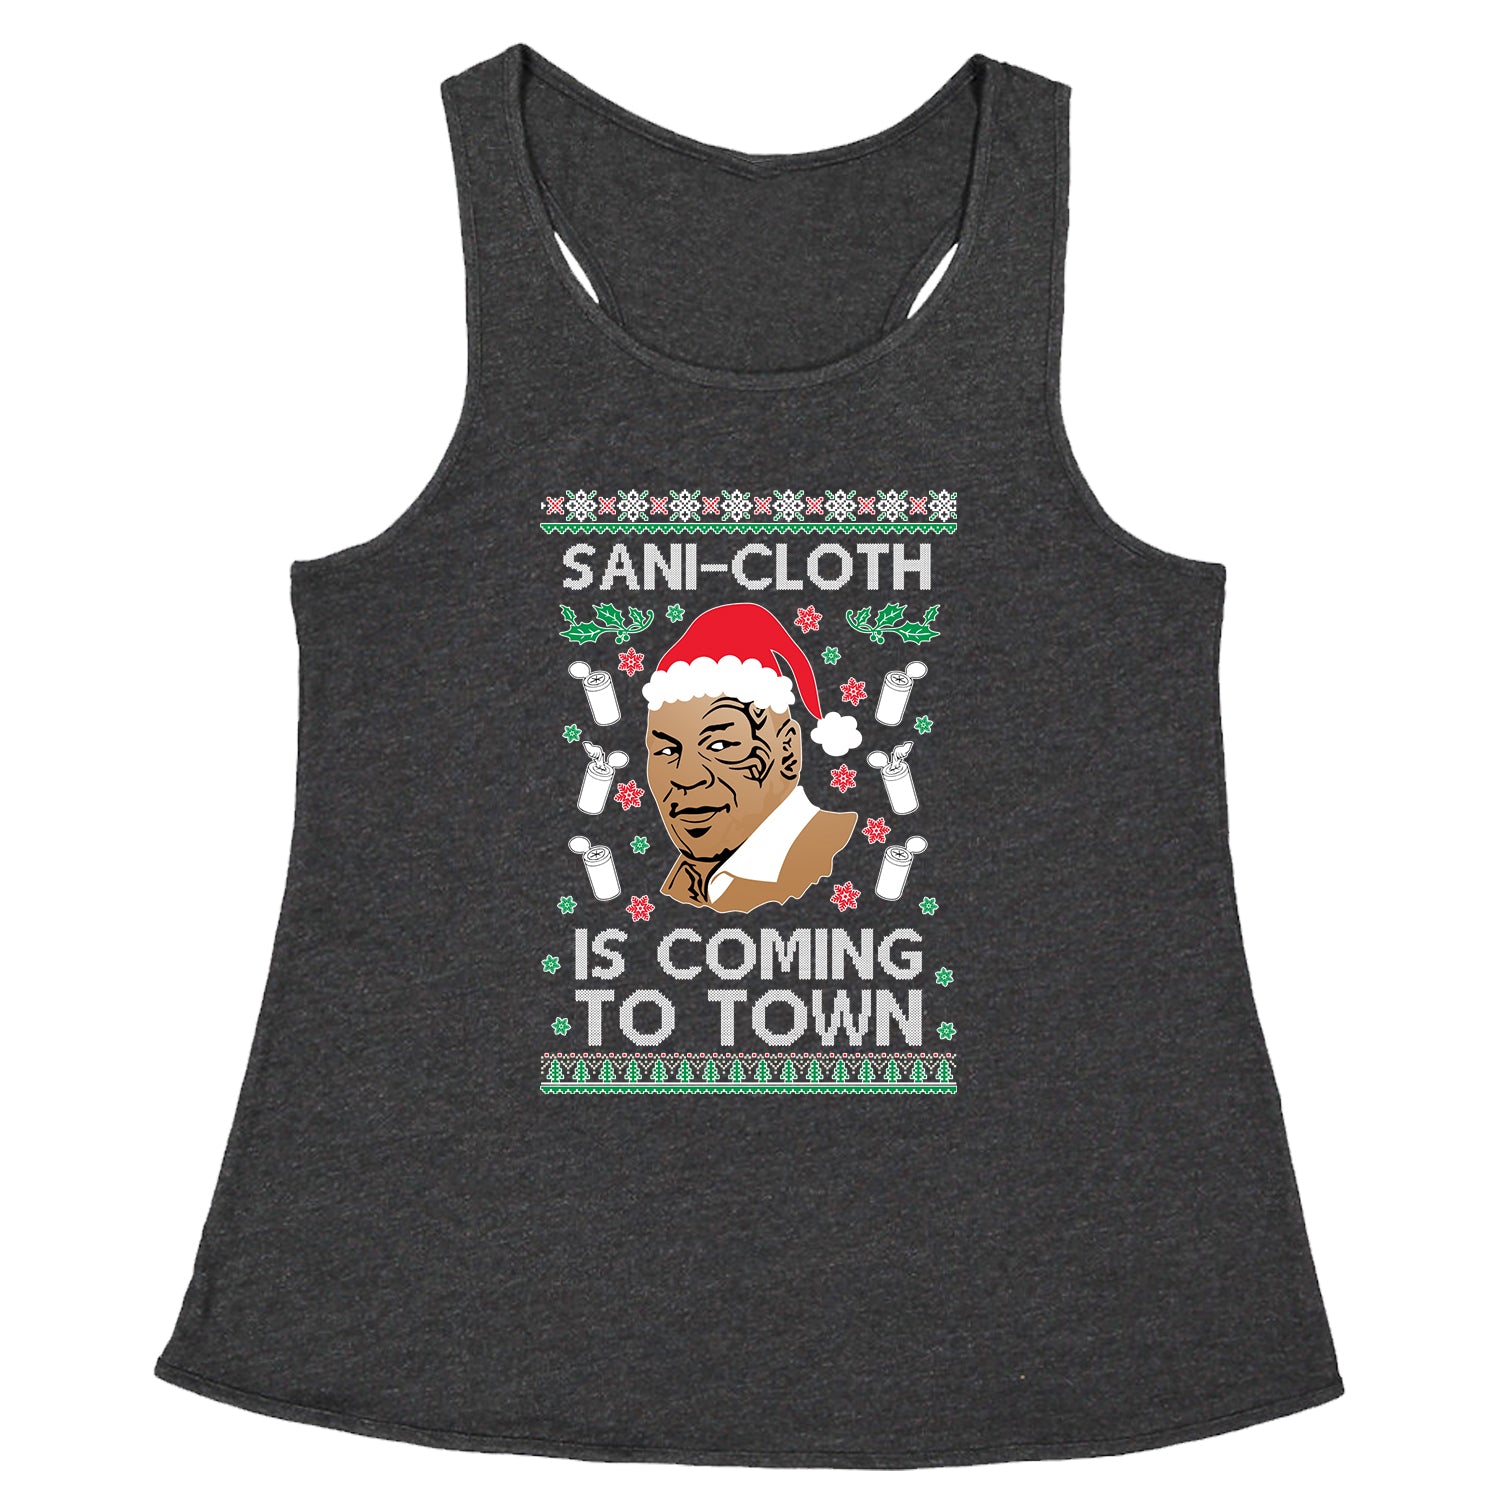 Sani-Cloth Is Coming To Town Ugly Christmas Racerback Tank Top for Women 2021, mike, miketyson, tyson by Expression Tees